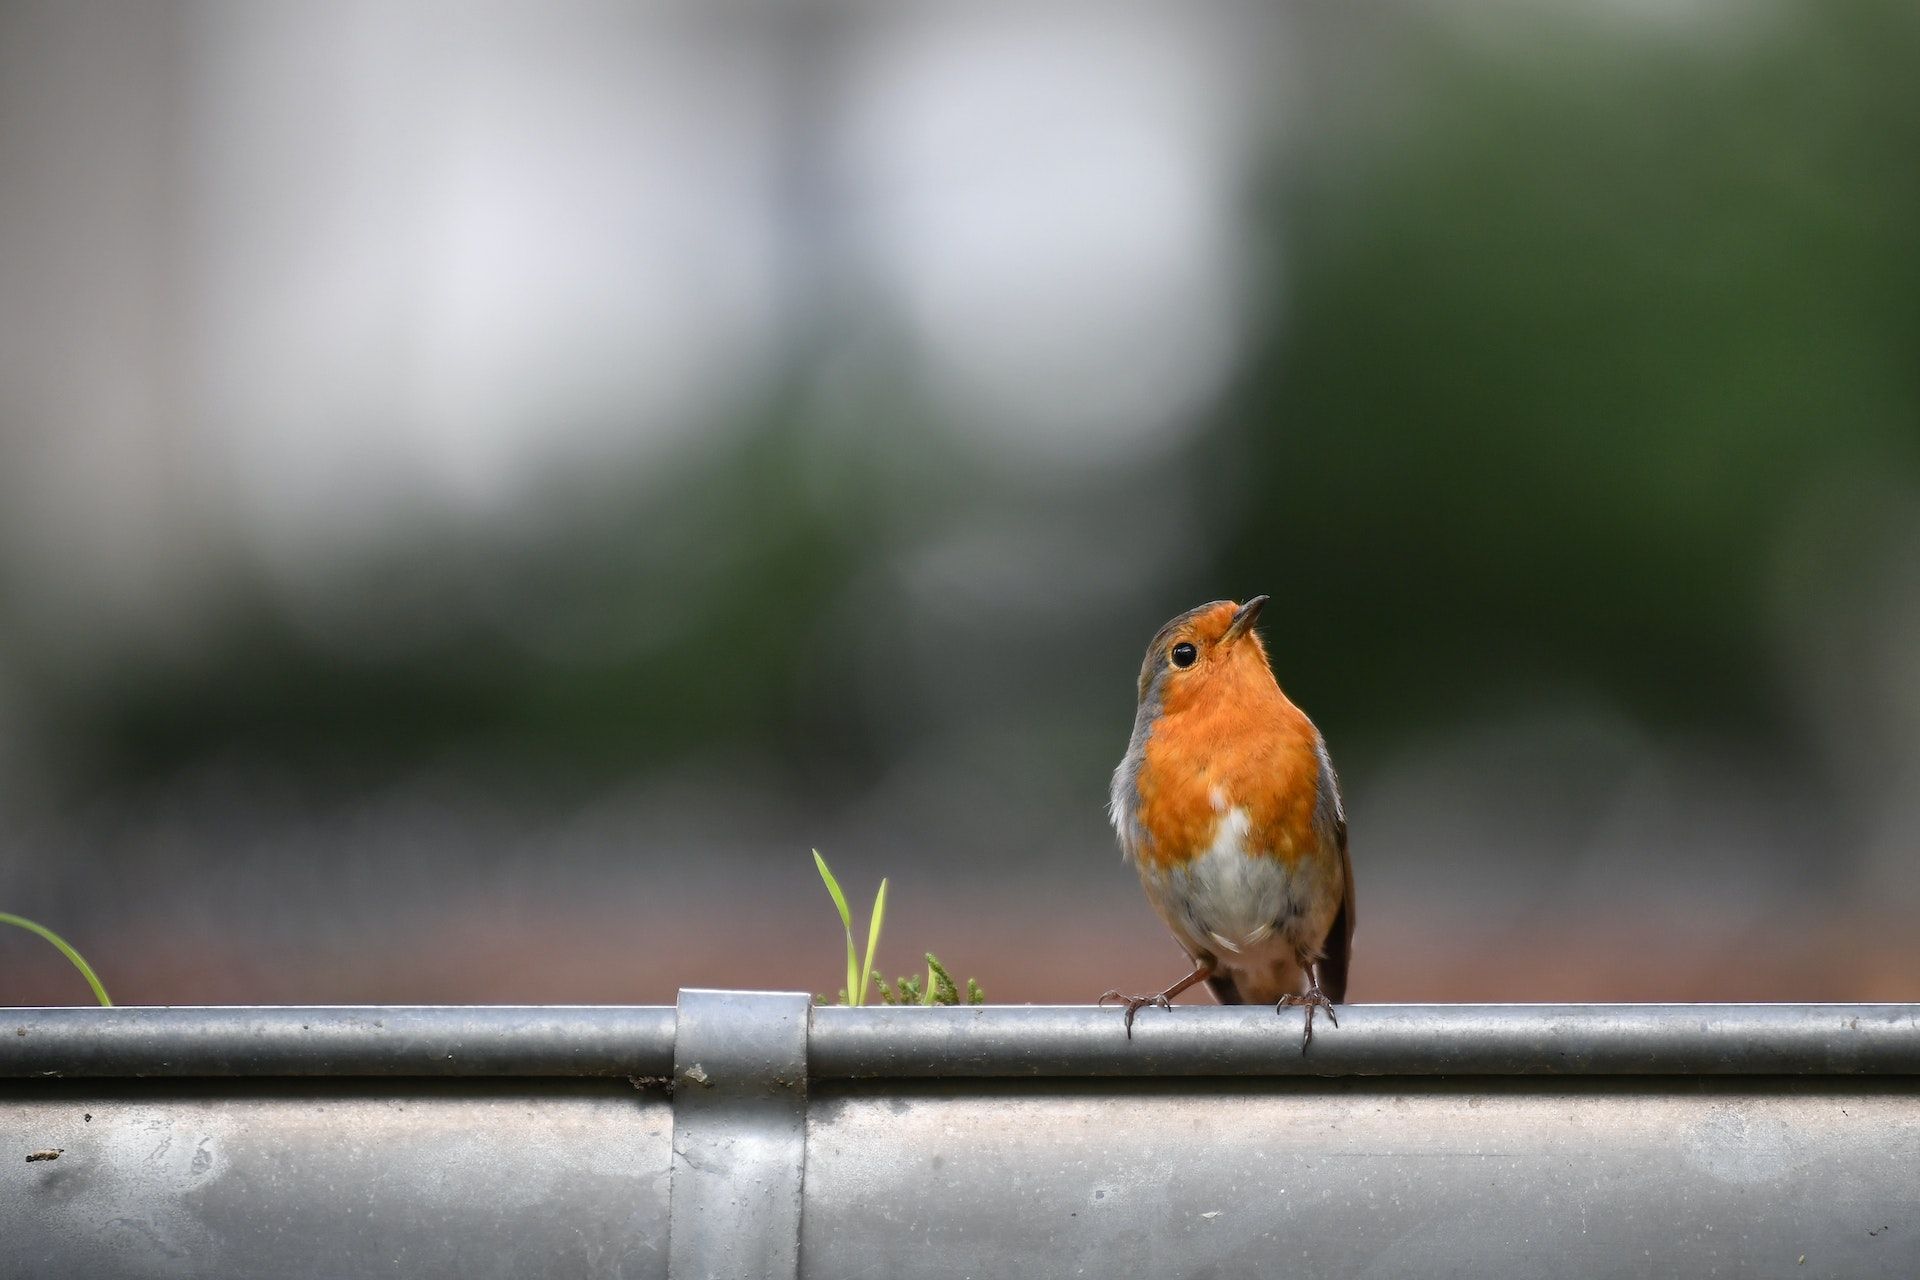 Picture of a small orange bird sitting on a gutter with greenery growing in it